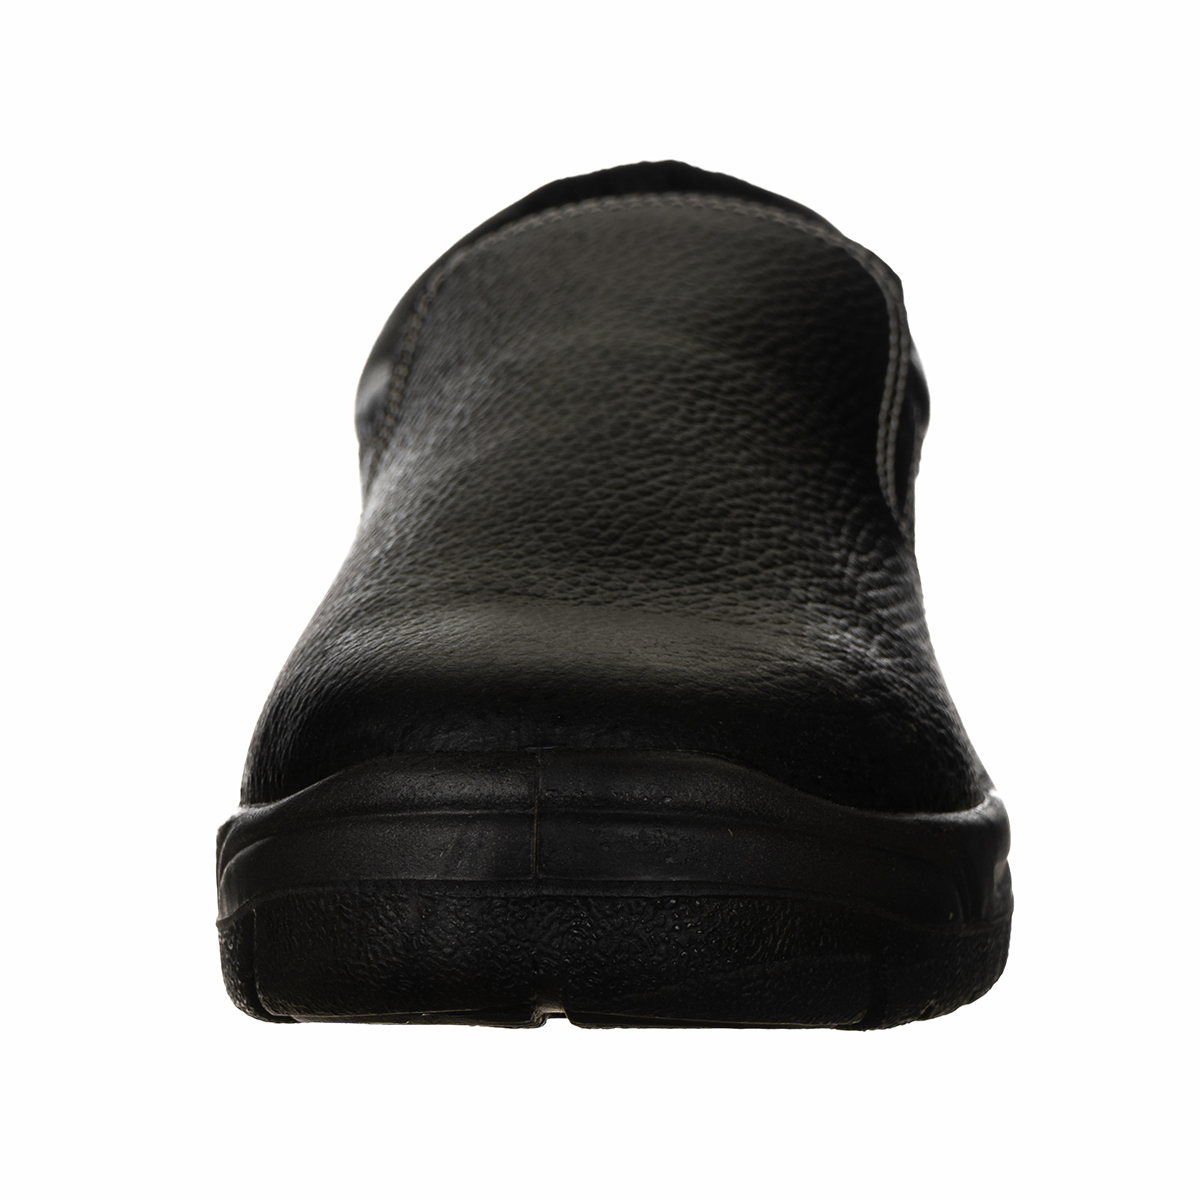 Slip On Safety Shoes Manufacturers, Suppliers in Pune